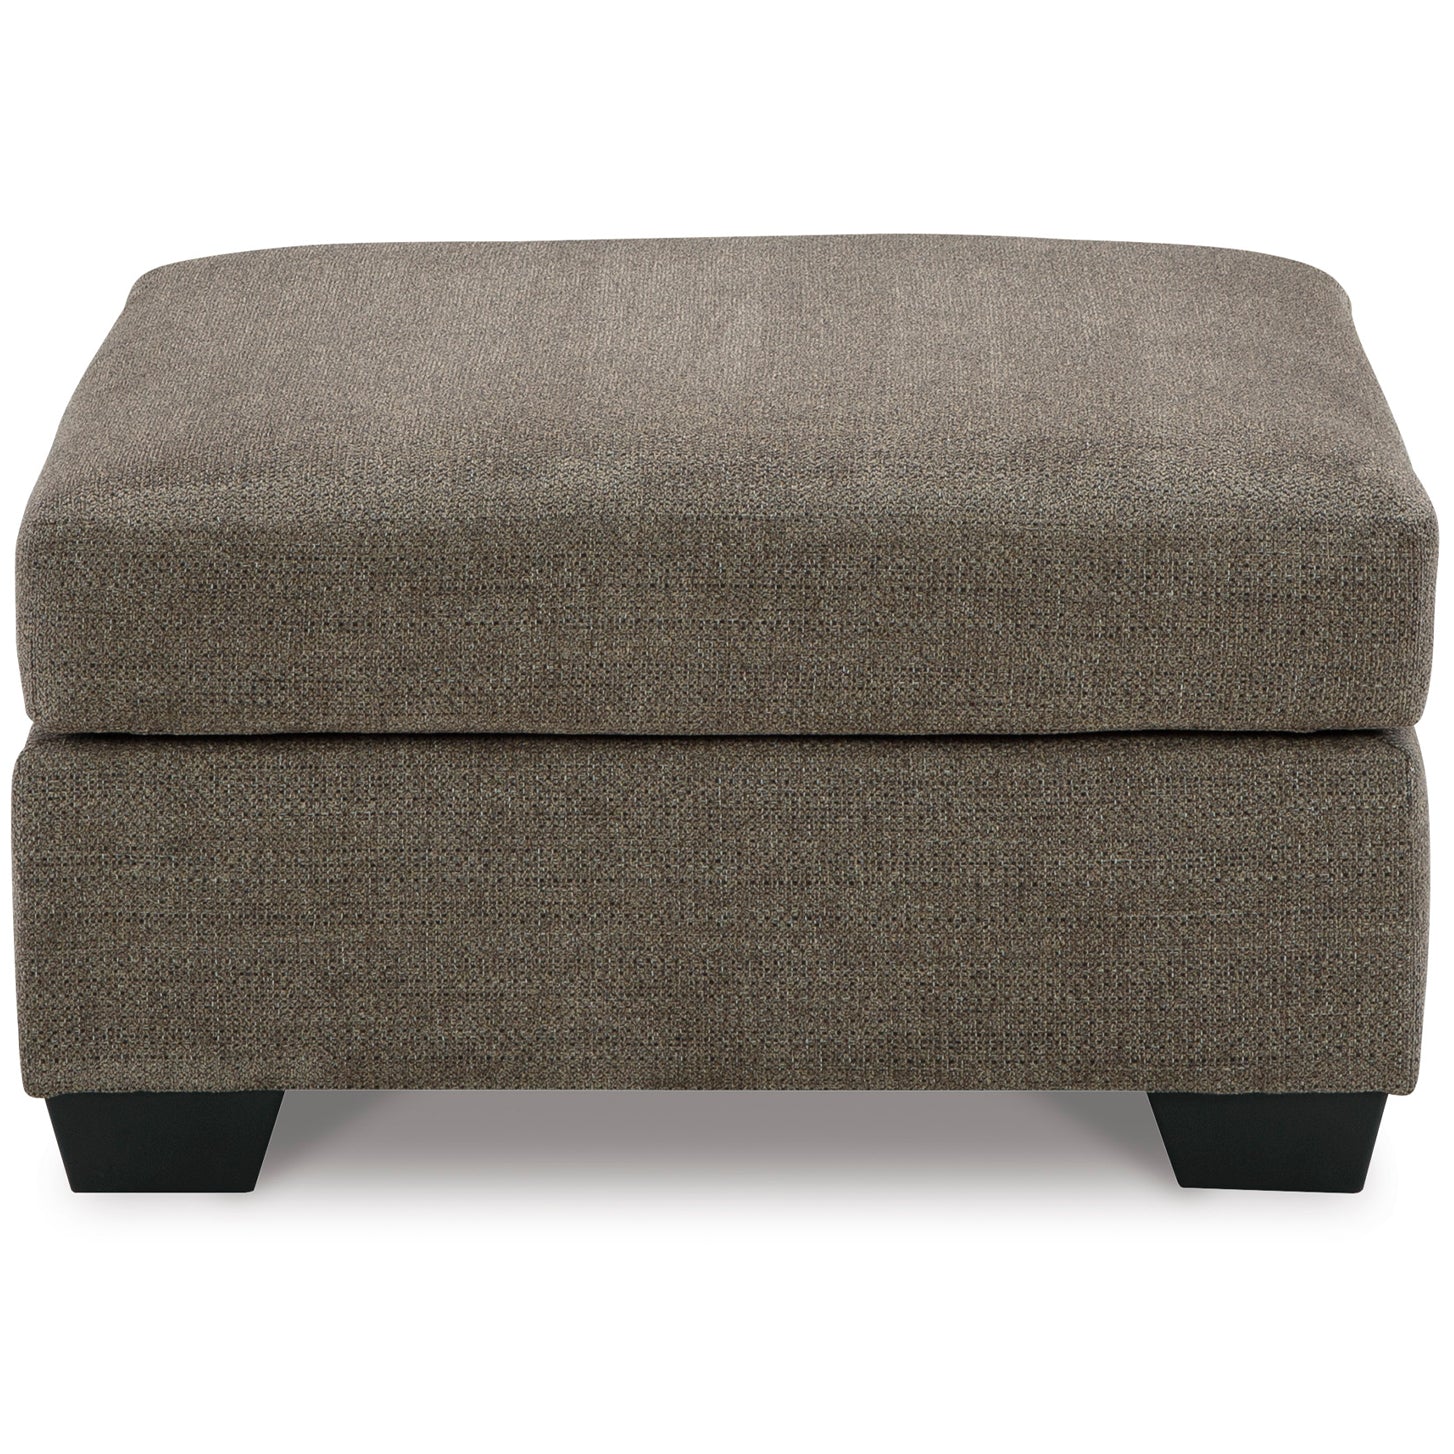 Stylish and functional Mahoney Oversized Accent Ottoman in chocolate, enhances any room with additional comfort